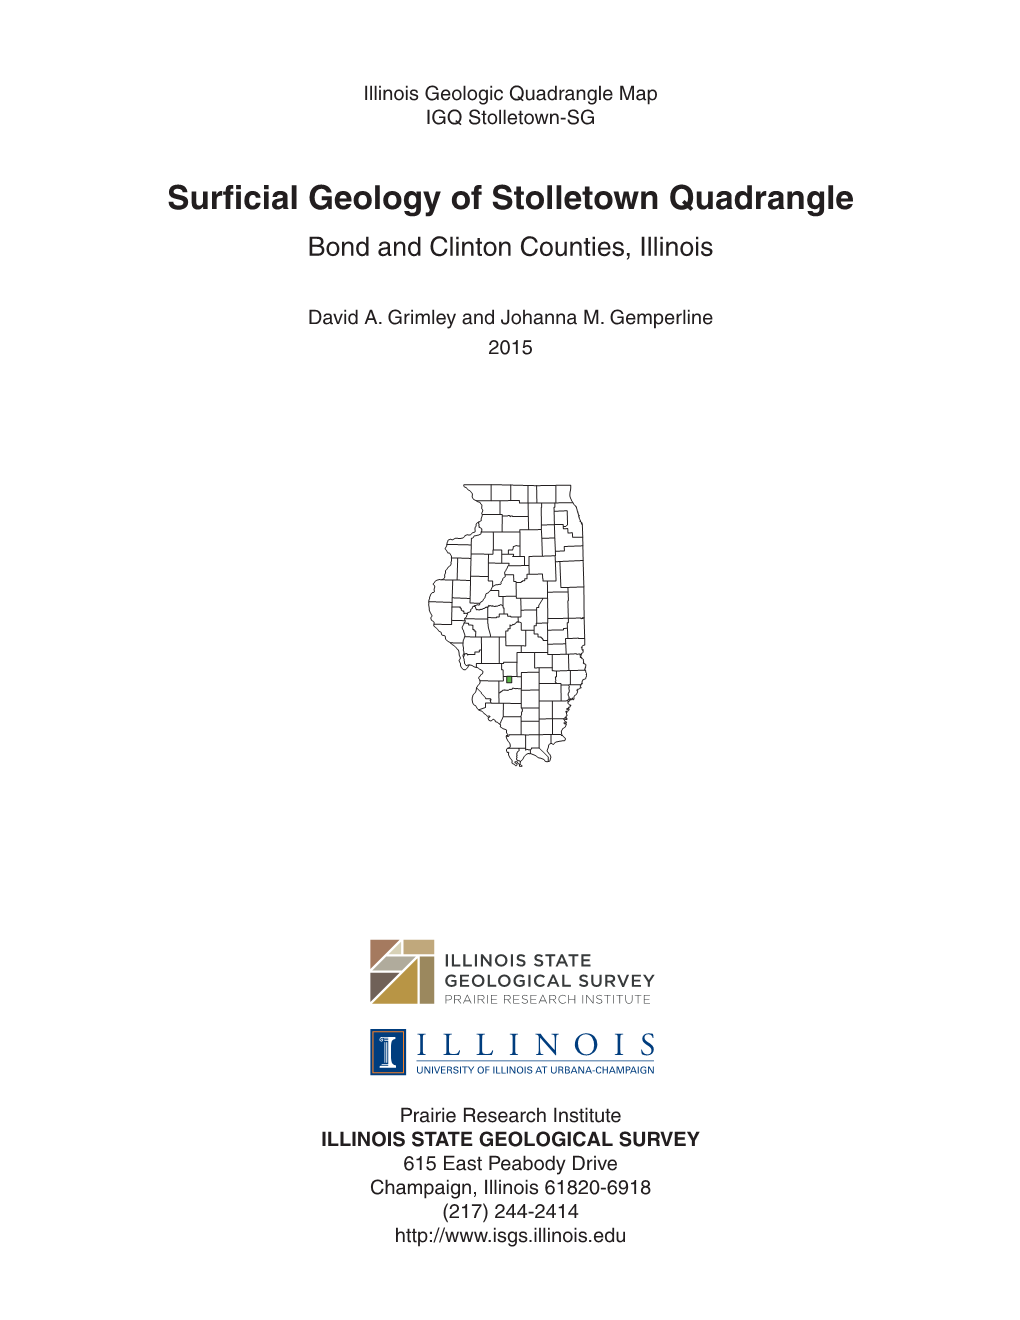 Surficial Geology of Stolletown Quadrangle